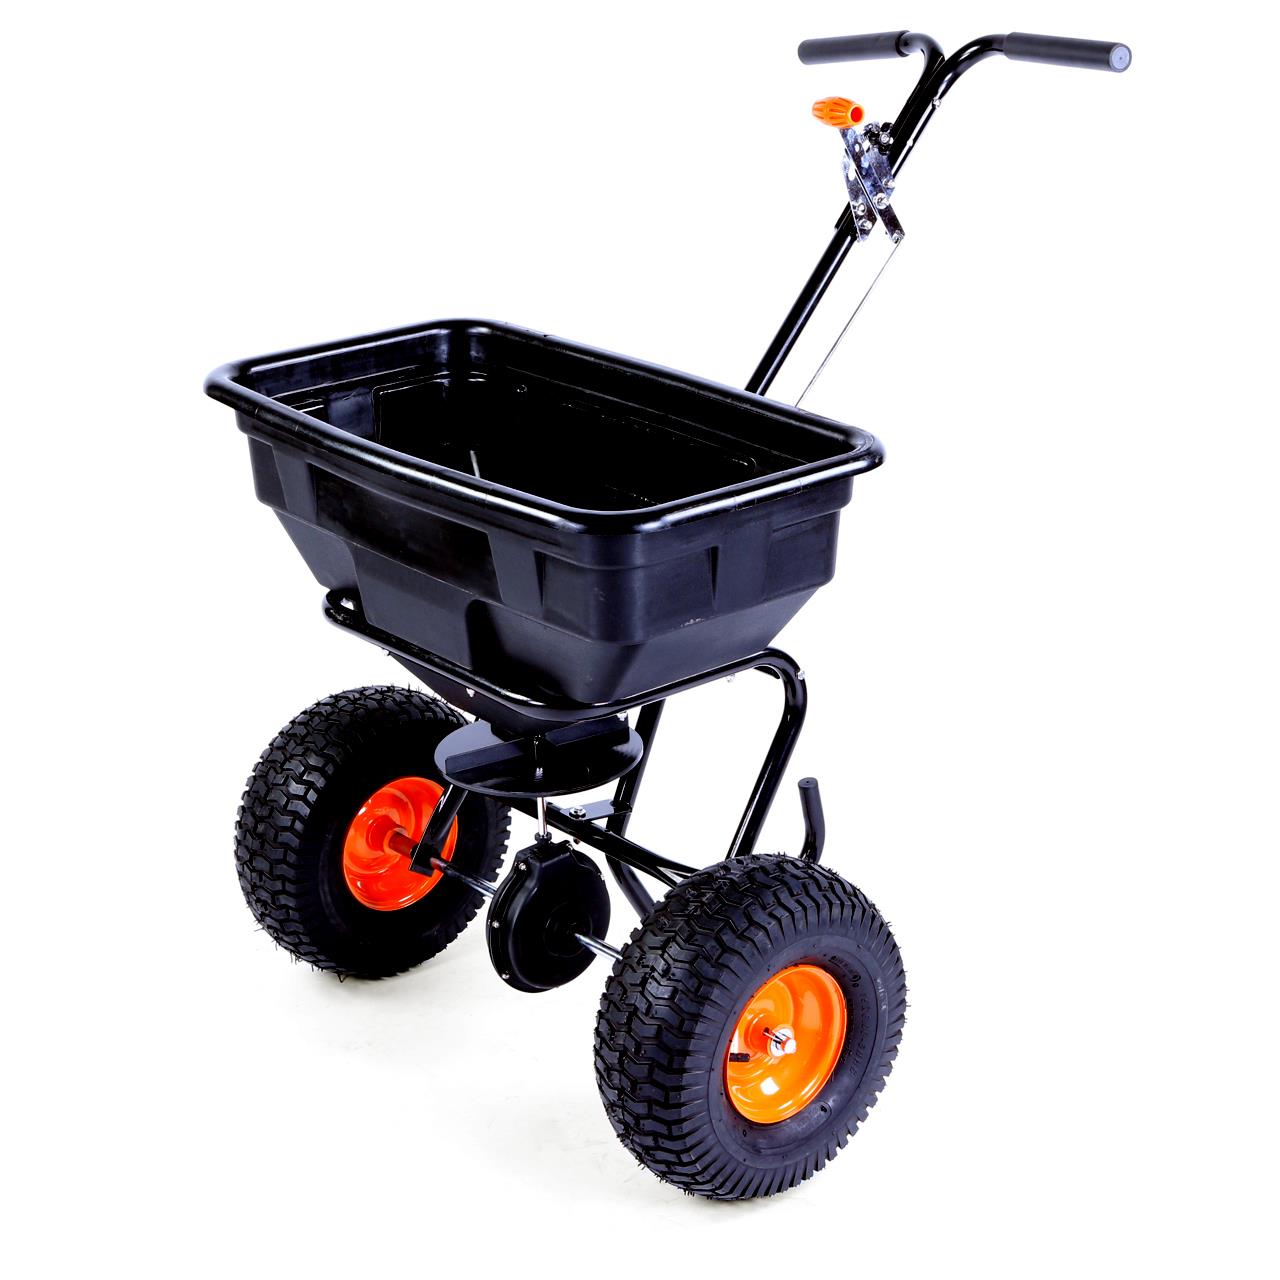 FUXTEC high-quality walk-behind spreader / centrifugal spreader / gritter spreader - for year-round use FX-GS56